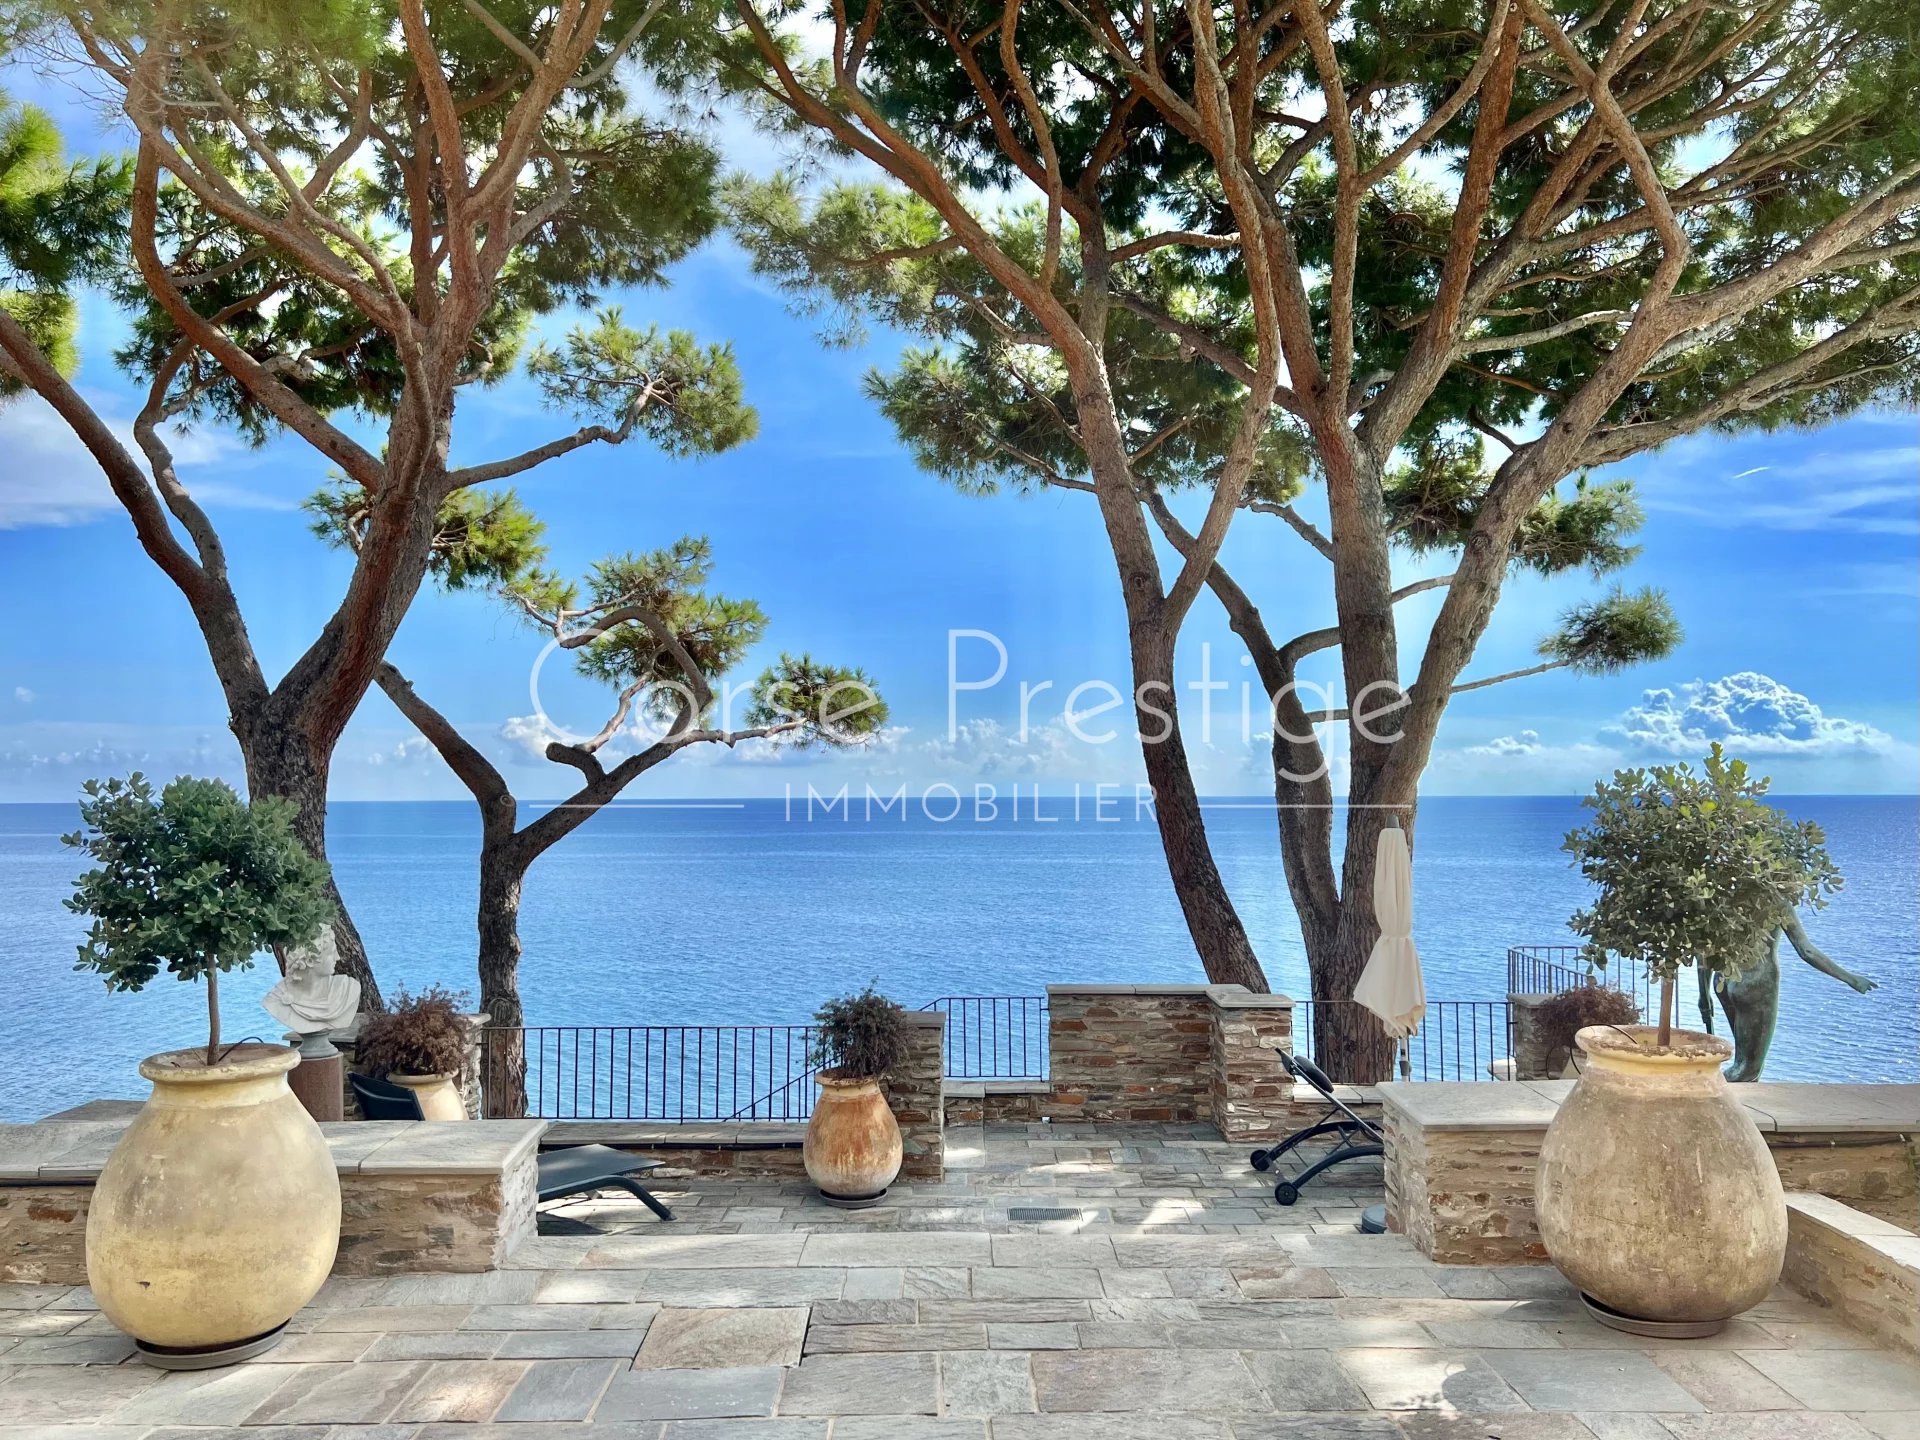 mansion for rent - access to the sea by foot - cap corse image4